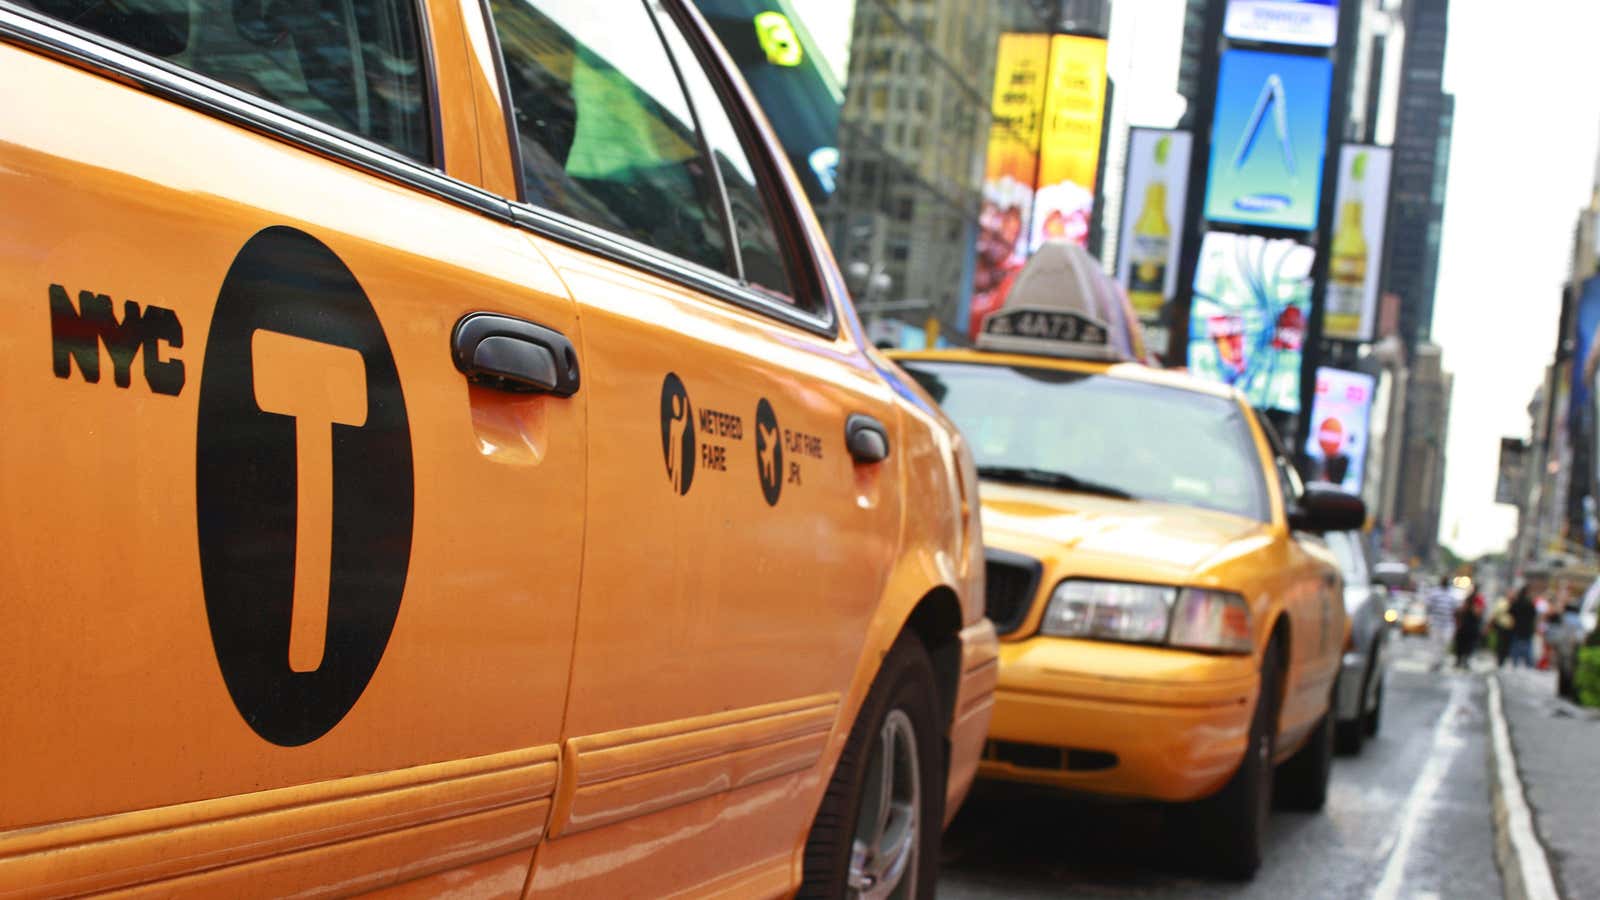 Or just an old-fashioned yellow cab.